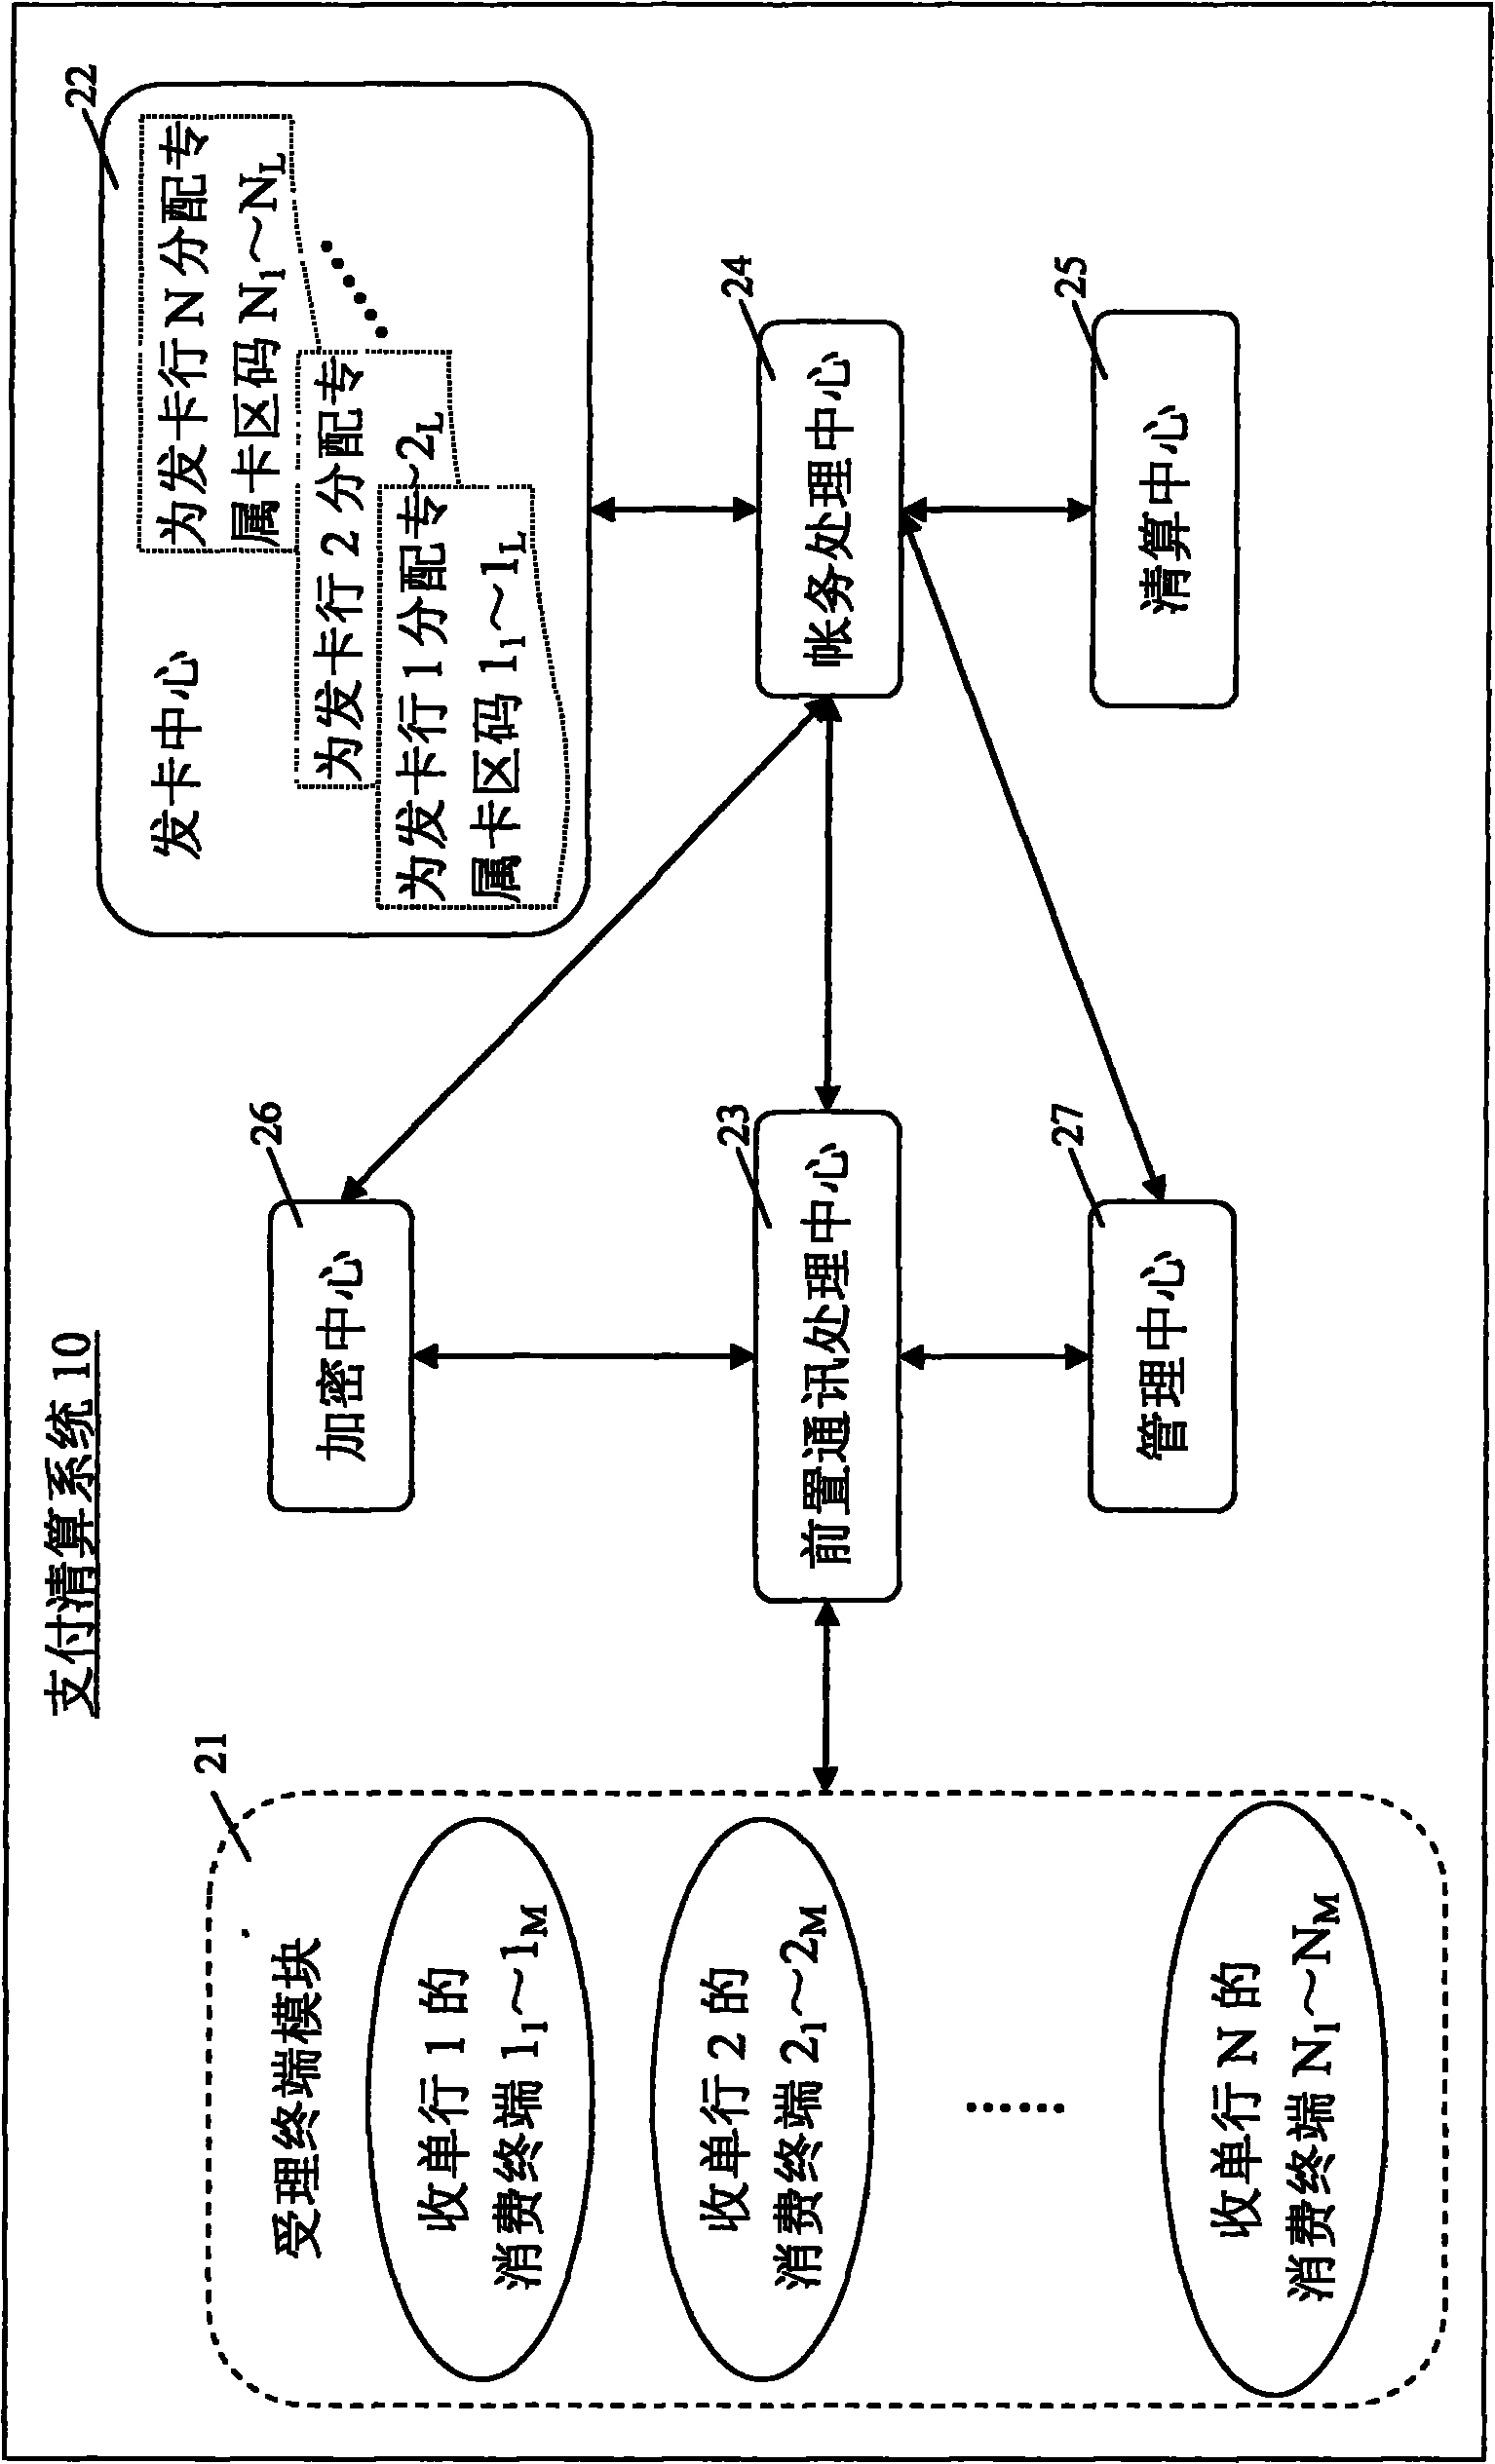 Multi-card multi-acquiring-bank payment and settlement method and system